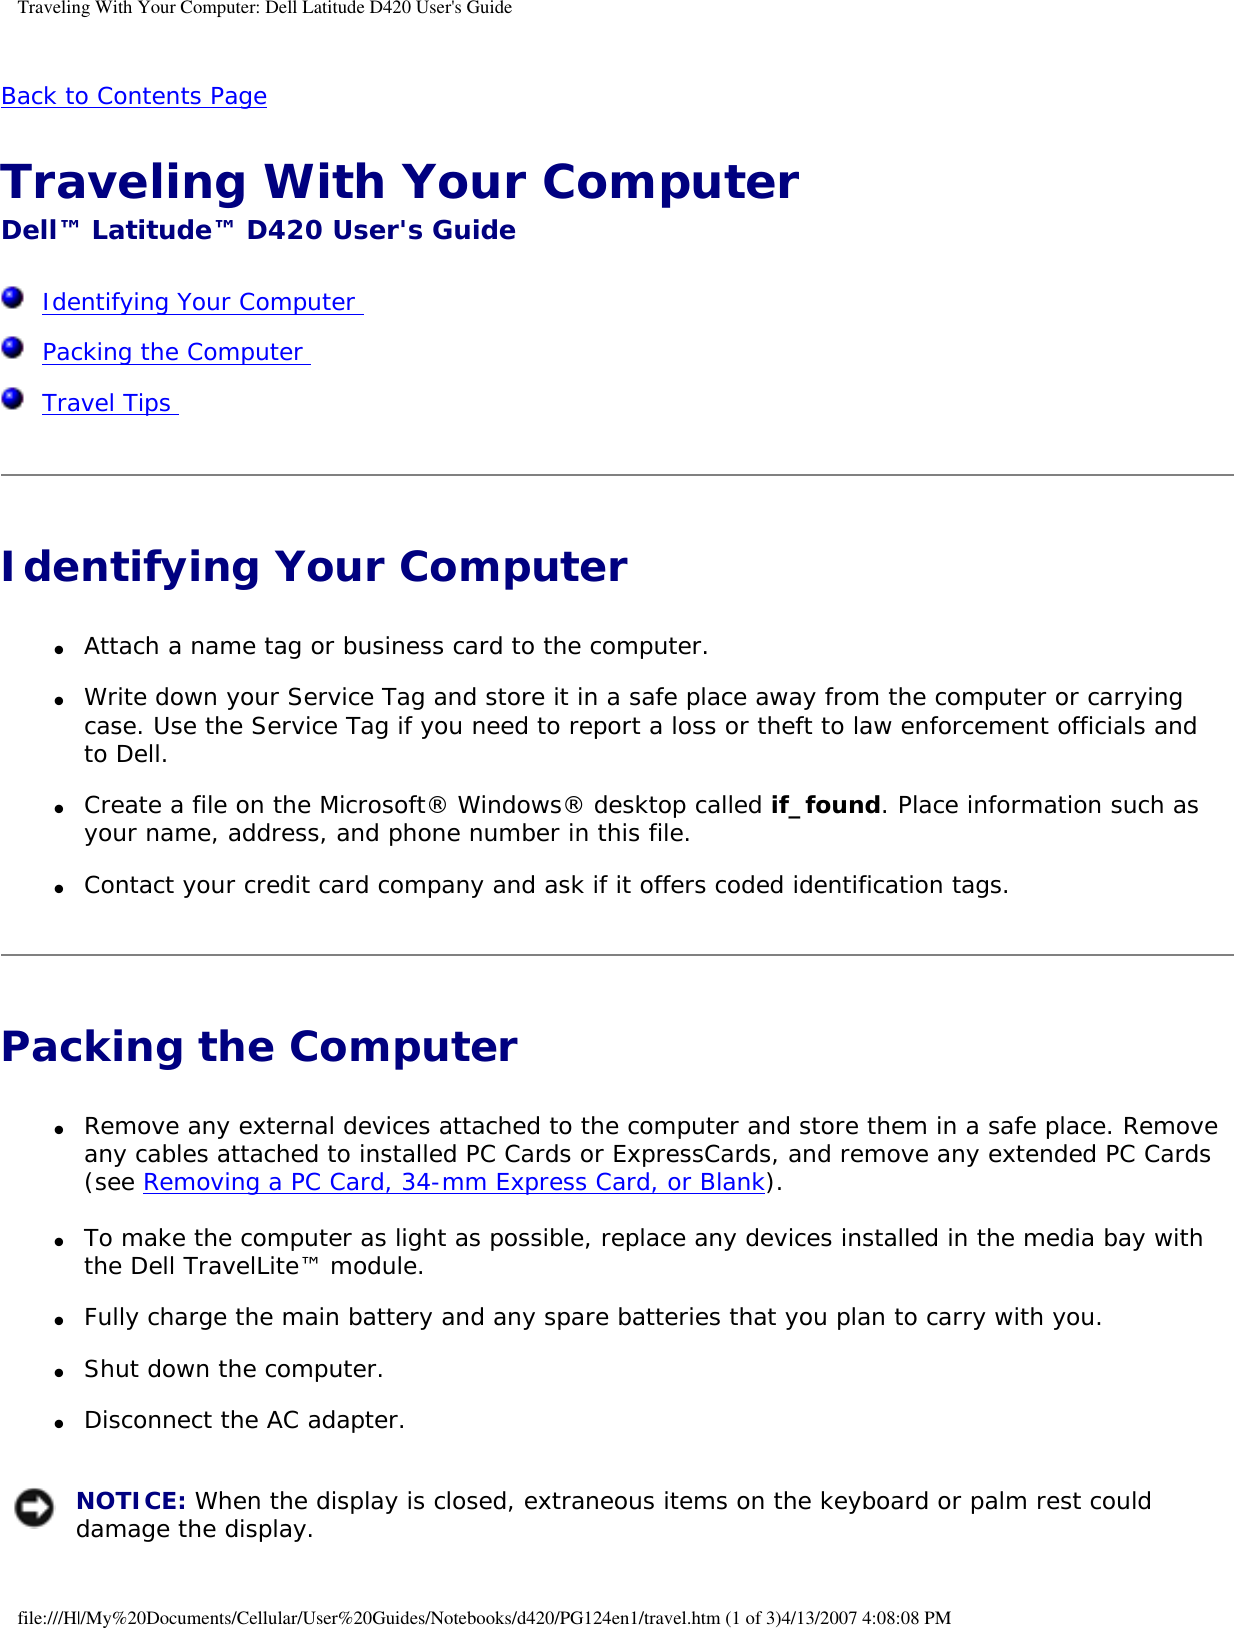 Traveling With Your Computer: Dell Latitude D420 User&apos;s GuideBack to Contents Page Traveling With Your Computer Dell™ Latitude™ D420 User&apos;s Guide  Identifying Your Computer   Packing the Computer   Travel Tips  Identifying Your Computer ●     Attach a name tag or business card to the computer.  ●     Write down your Service Tag and store it in a safe place away from the computer or carrying case. Use the Service Tag if you need to report a loss or theft to law enforcement officials and to Dell.  ●     Create a file on the Microsoft® Windows® desktop called if_found. Place information such as your name, address, and phone number in this file.  ●     Contact your credit card company and ask if it offers coded identification tags.  Packing the Computer ●     Remove any external devices attached to the computer and store them in a safe place. Remove any cables attached to installed PC Cards or ExpressCards, and remove any extended PC Cards (see Removing a PC Card, 34-mm Express Card, or Blank).  ●     To make the computer as light as possible, replace any devices installed in the media bay with the Dell TravelLite™ module.  ●     Fully charge the main battery and any spare batteries that you plan to carry with you.  ●     Shut down the computer.  ●     Disconnect the AC adapter.   NOTICE: When the display is closed, extraneous items on the keyboard or palm rest could damage the display. file:///H|/My%20Documents/Cellular/User%20Guides/Notebooks/d420/PG124en1/travel.htm (1 of 3)4/13/2007 4:08:08 PM